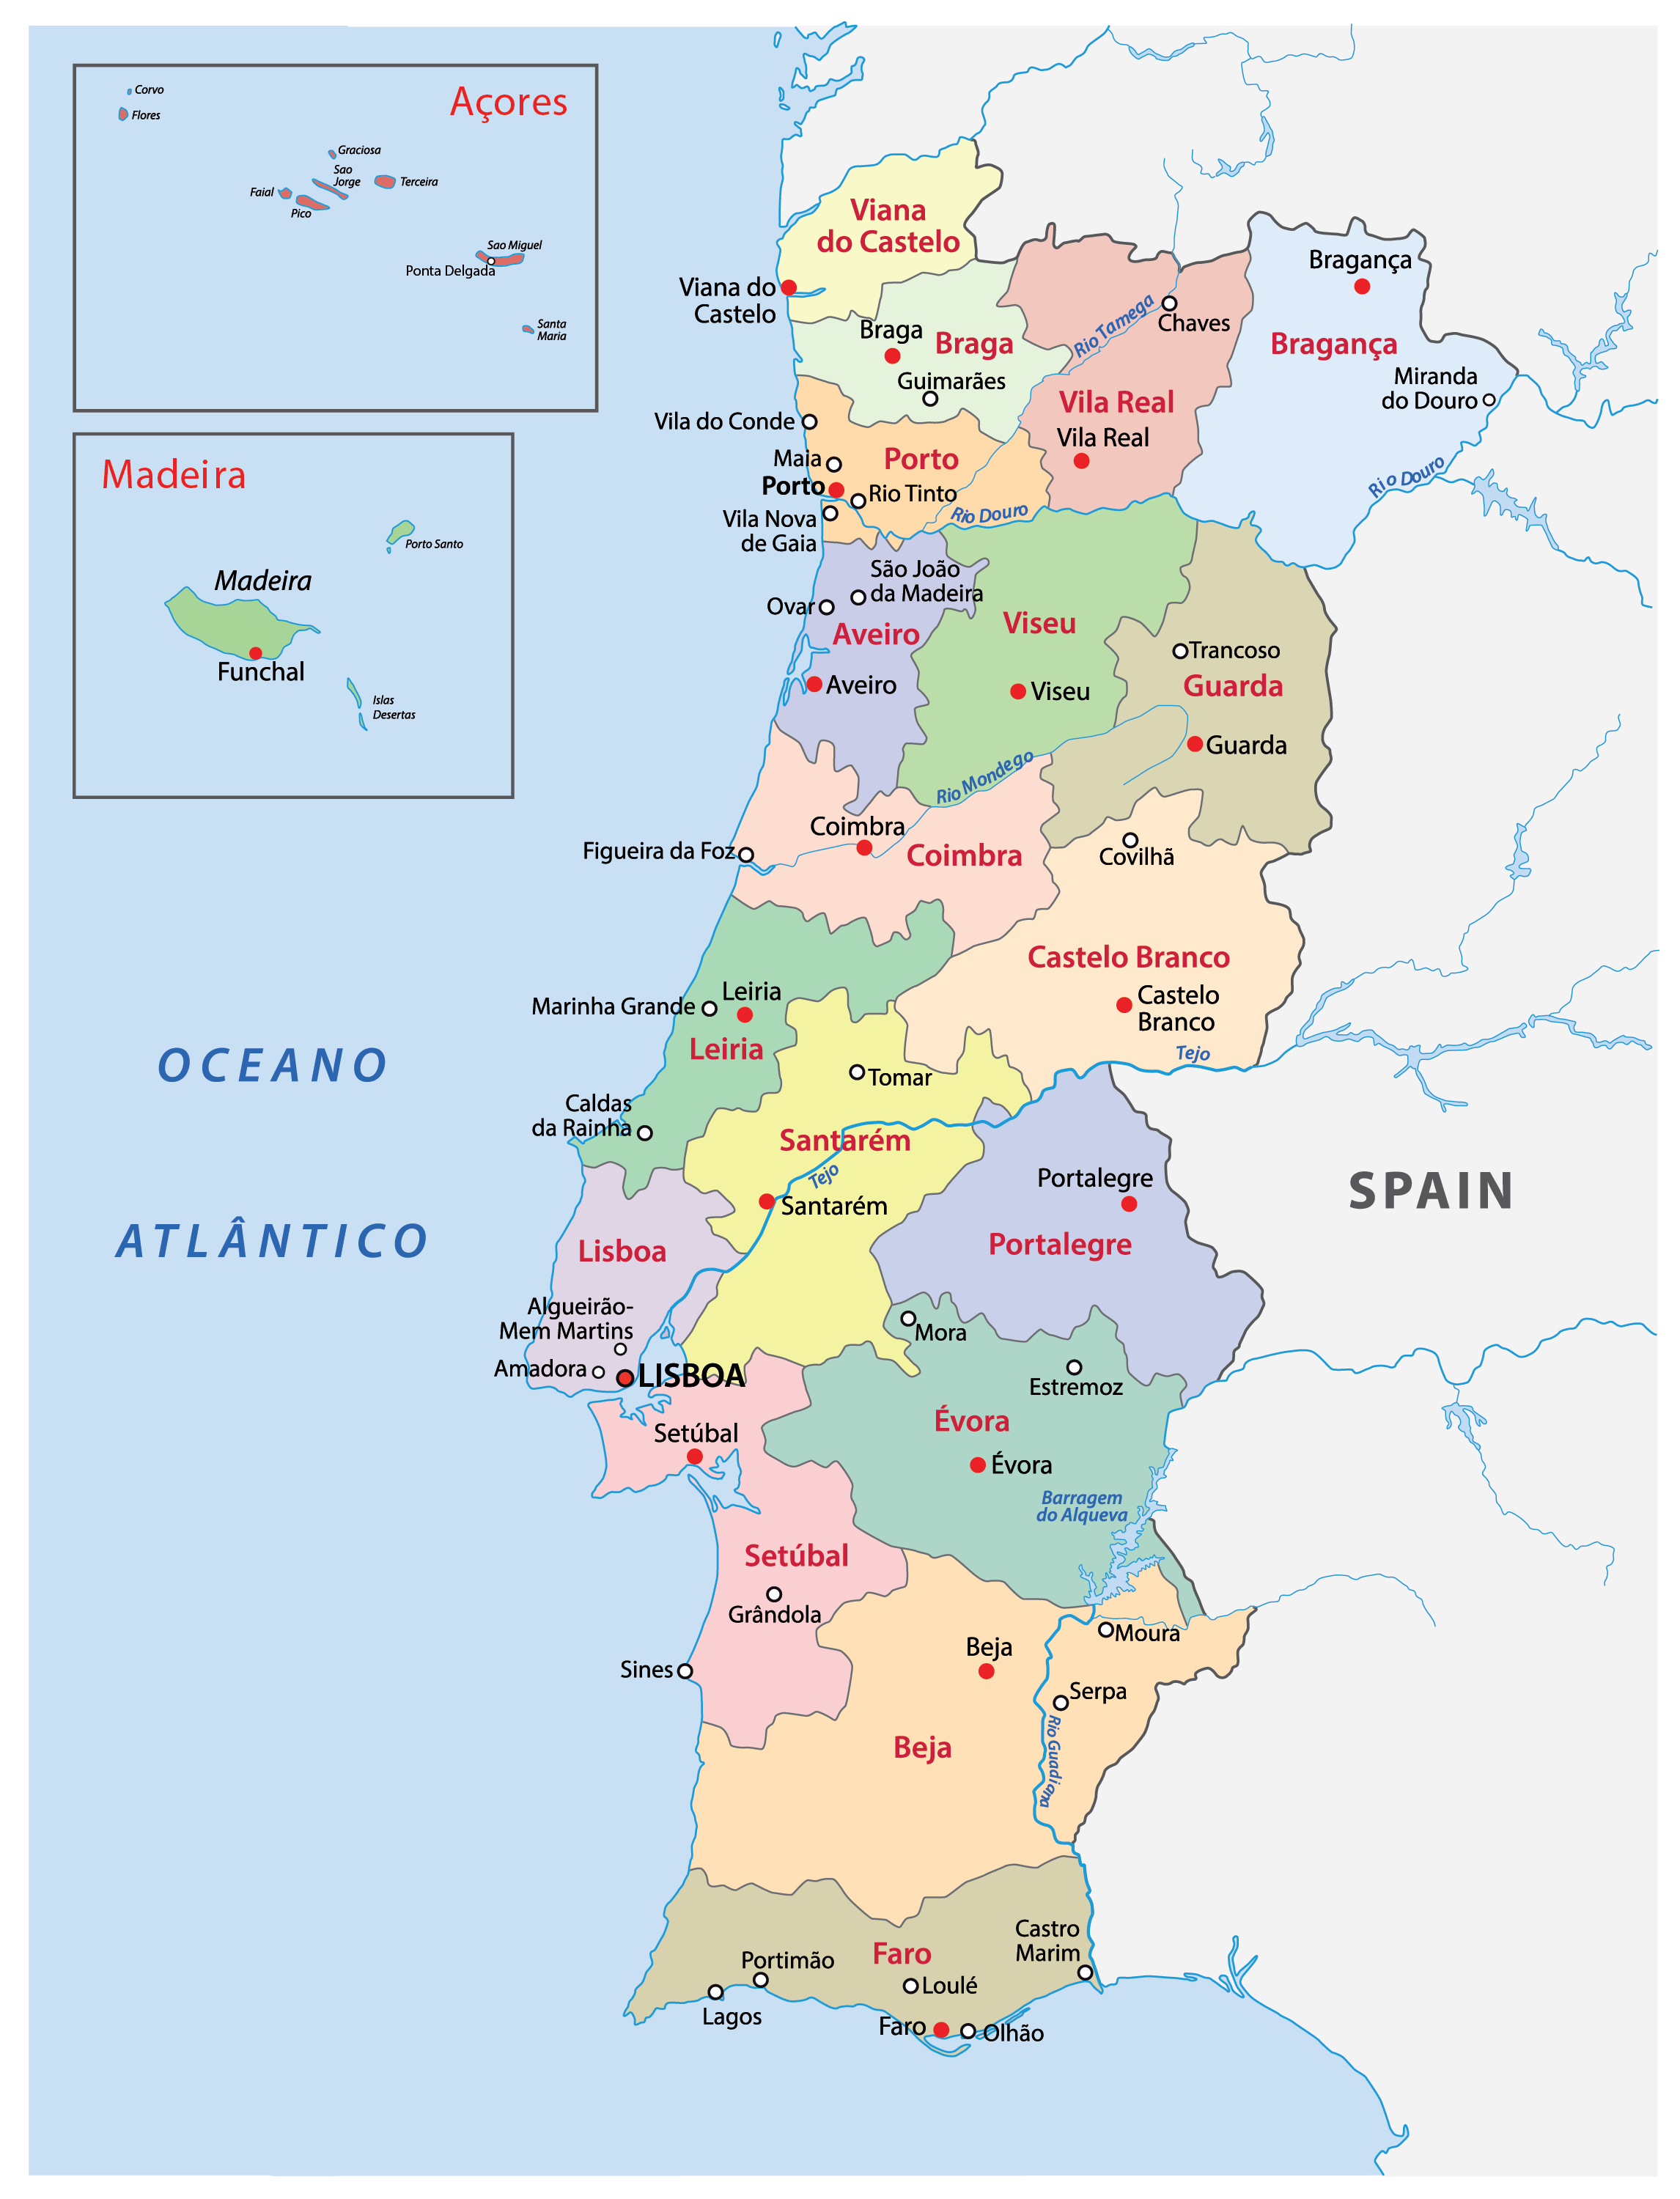 Districts of Portugal map